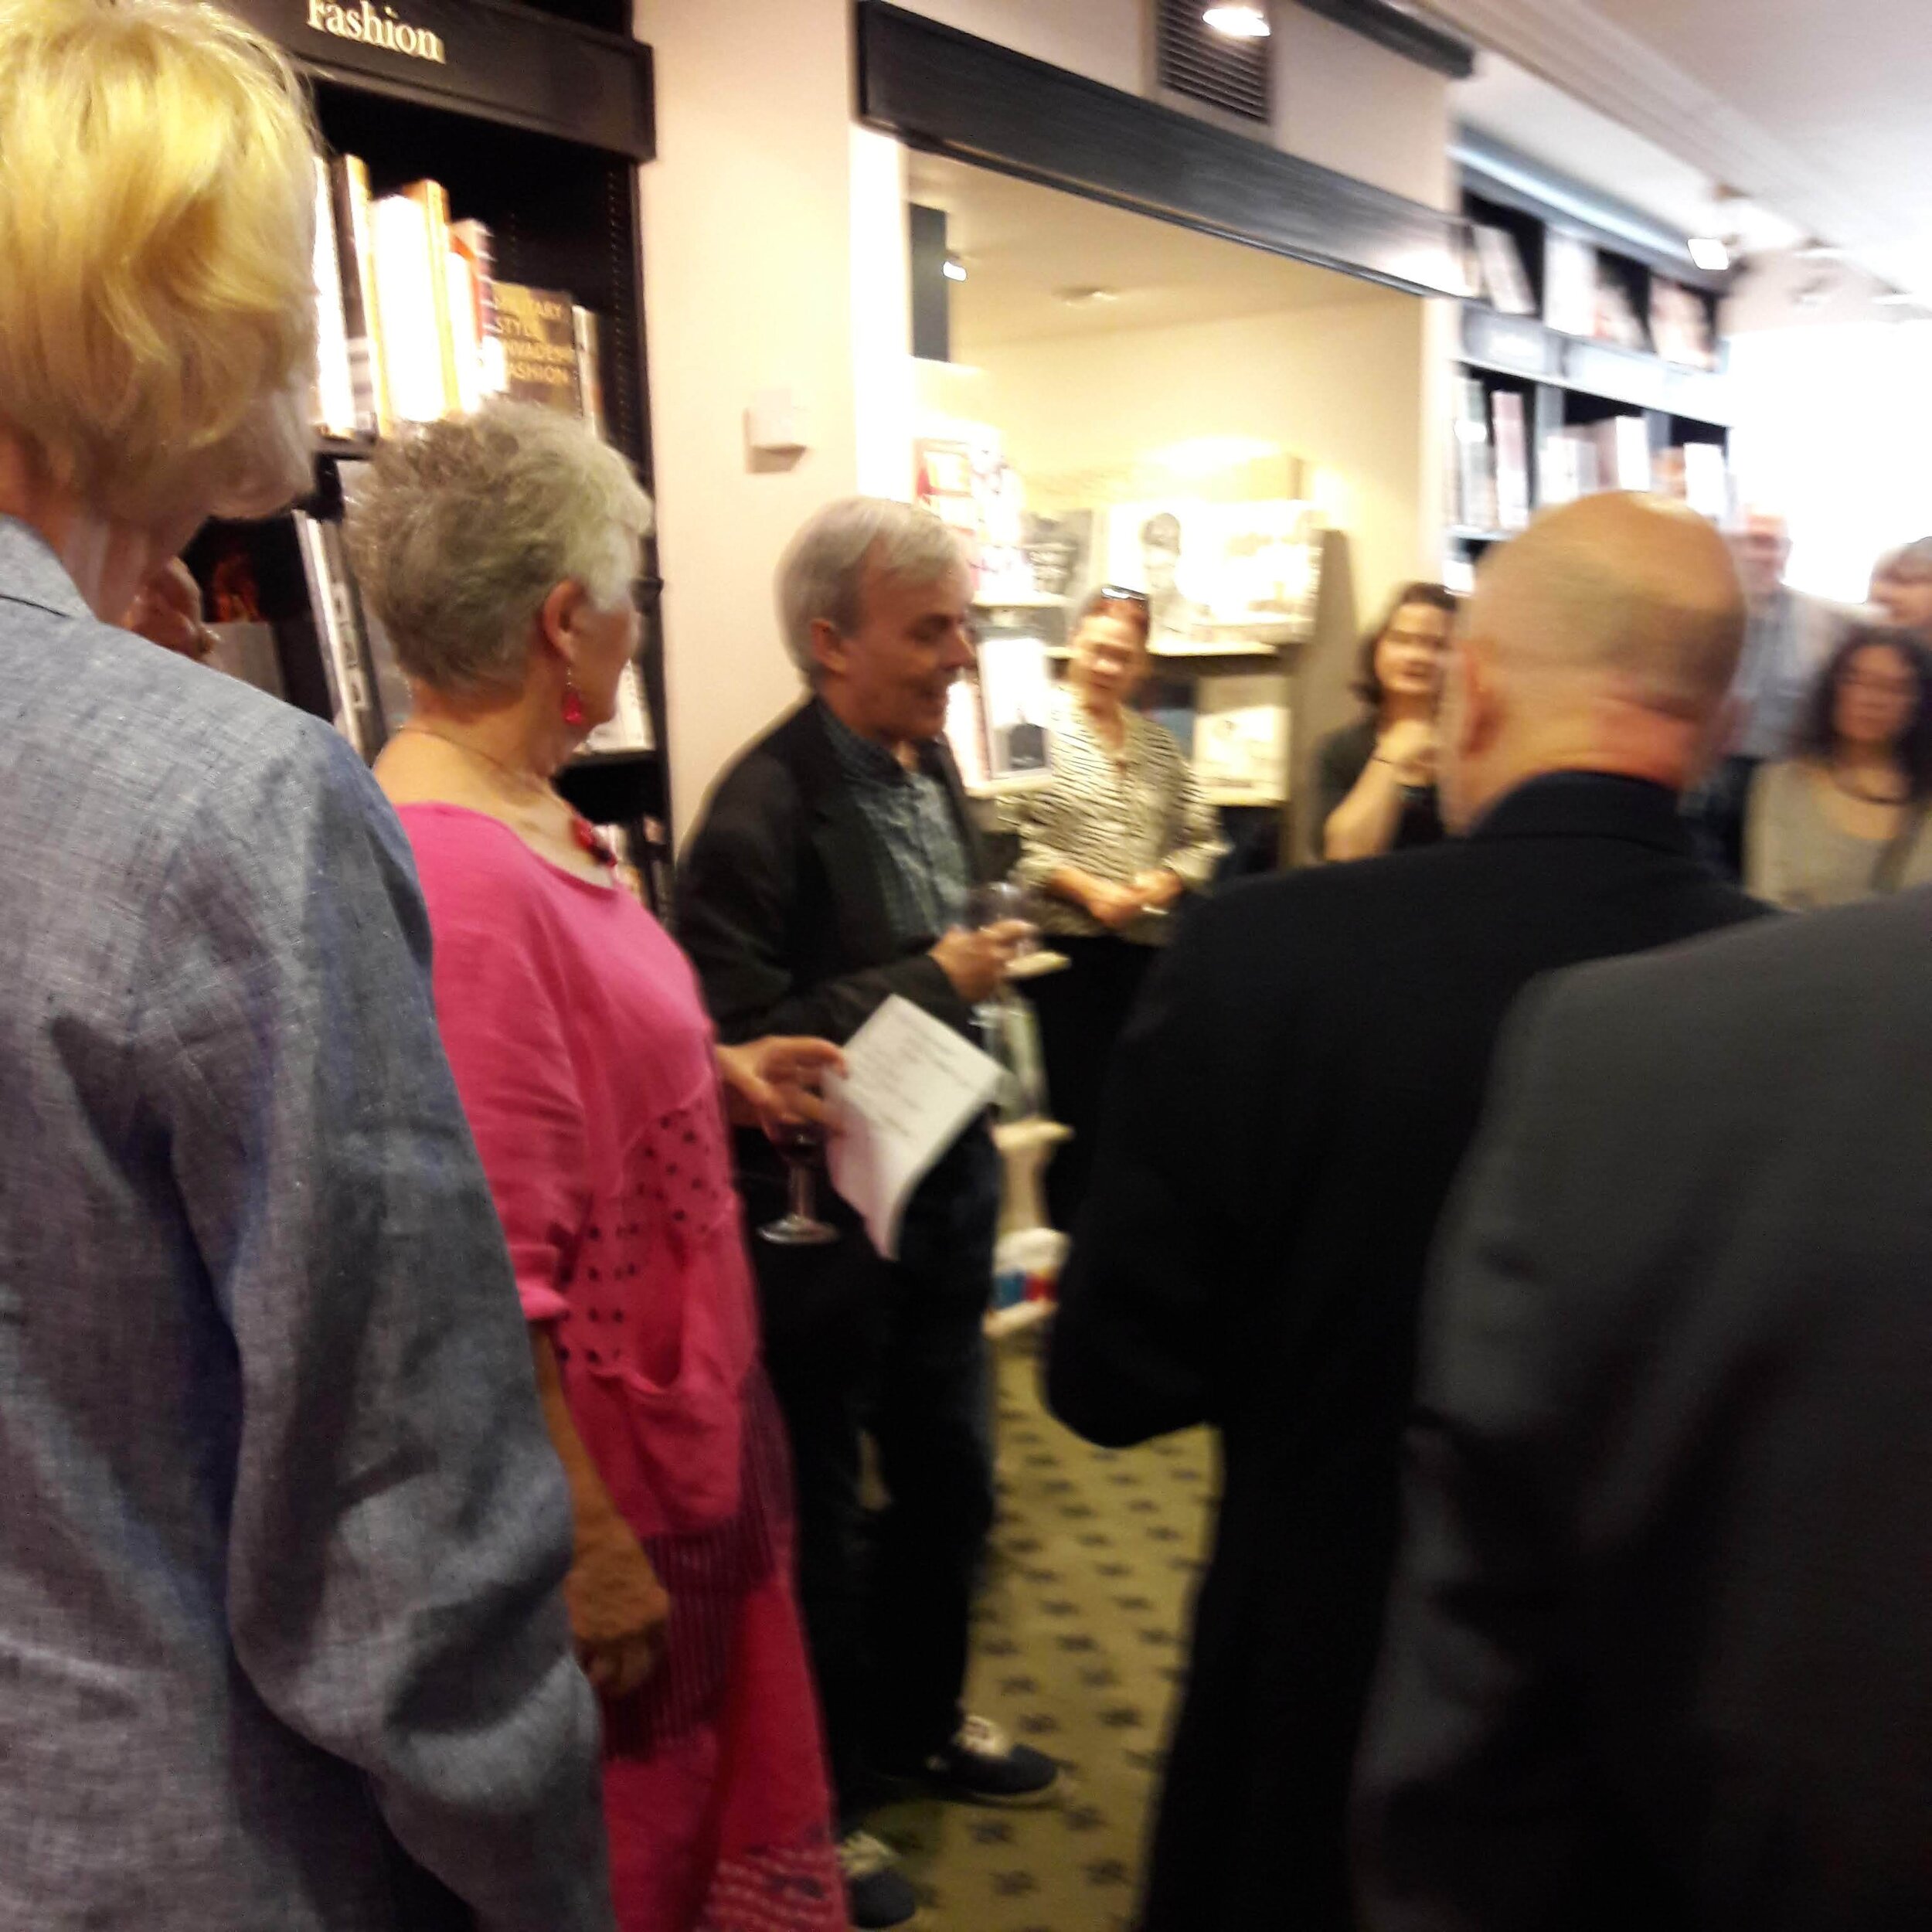 Martin Edwards at the launch of Taking Detective Stories Seriously, Hatchards Bookshop, London